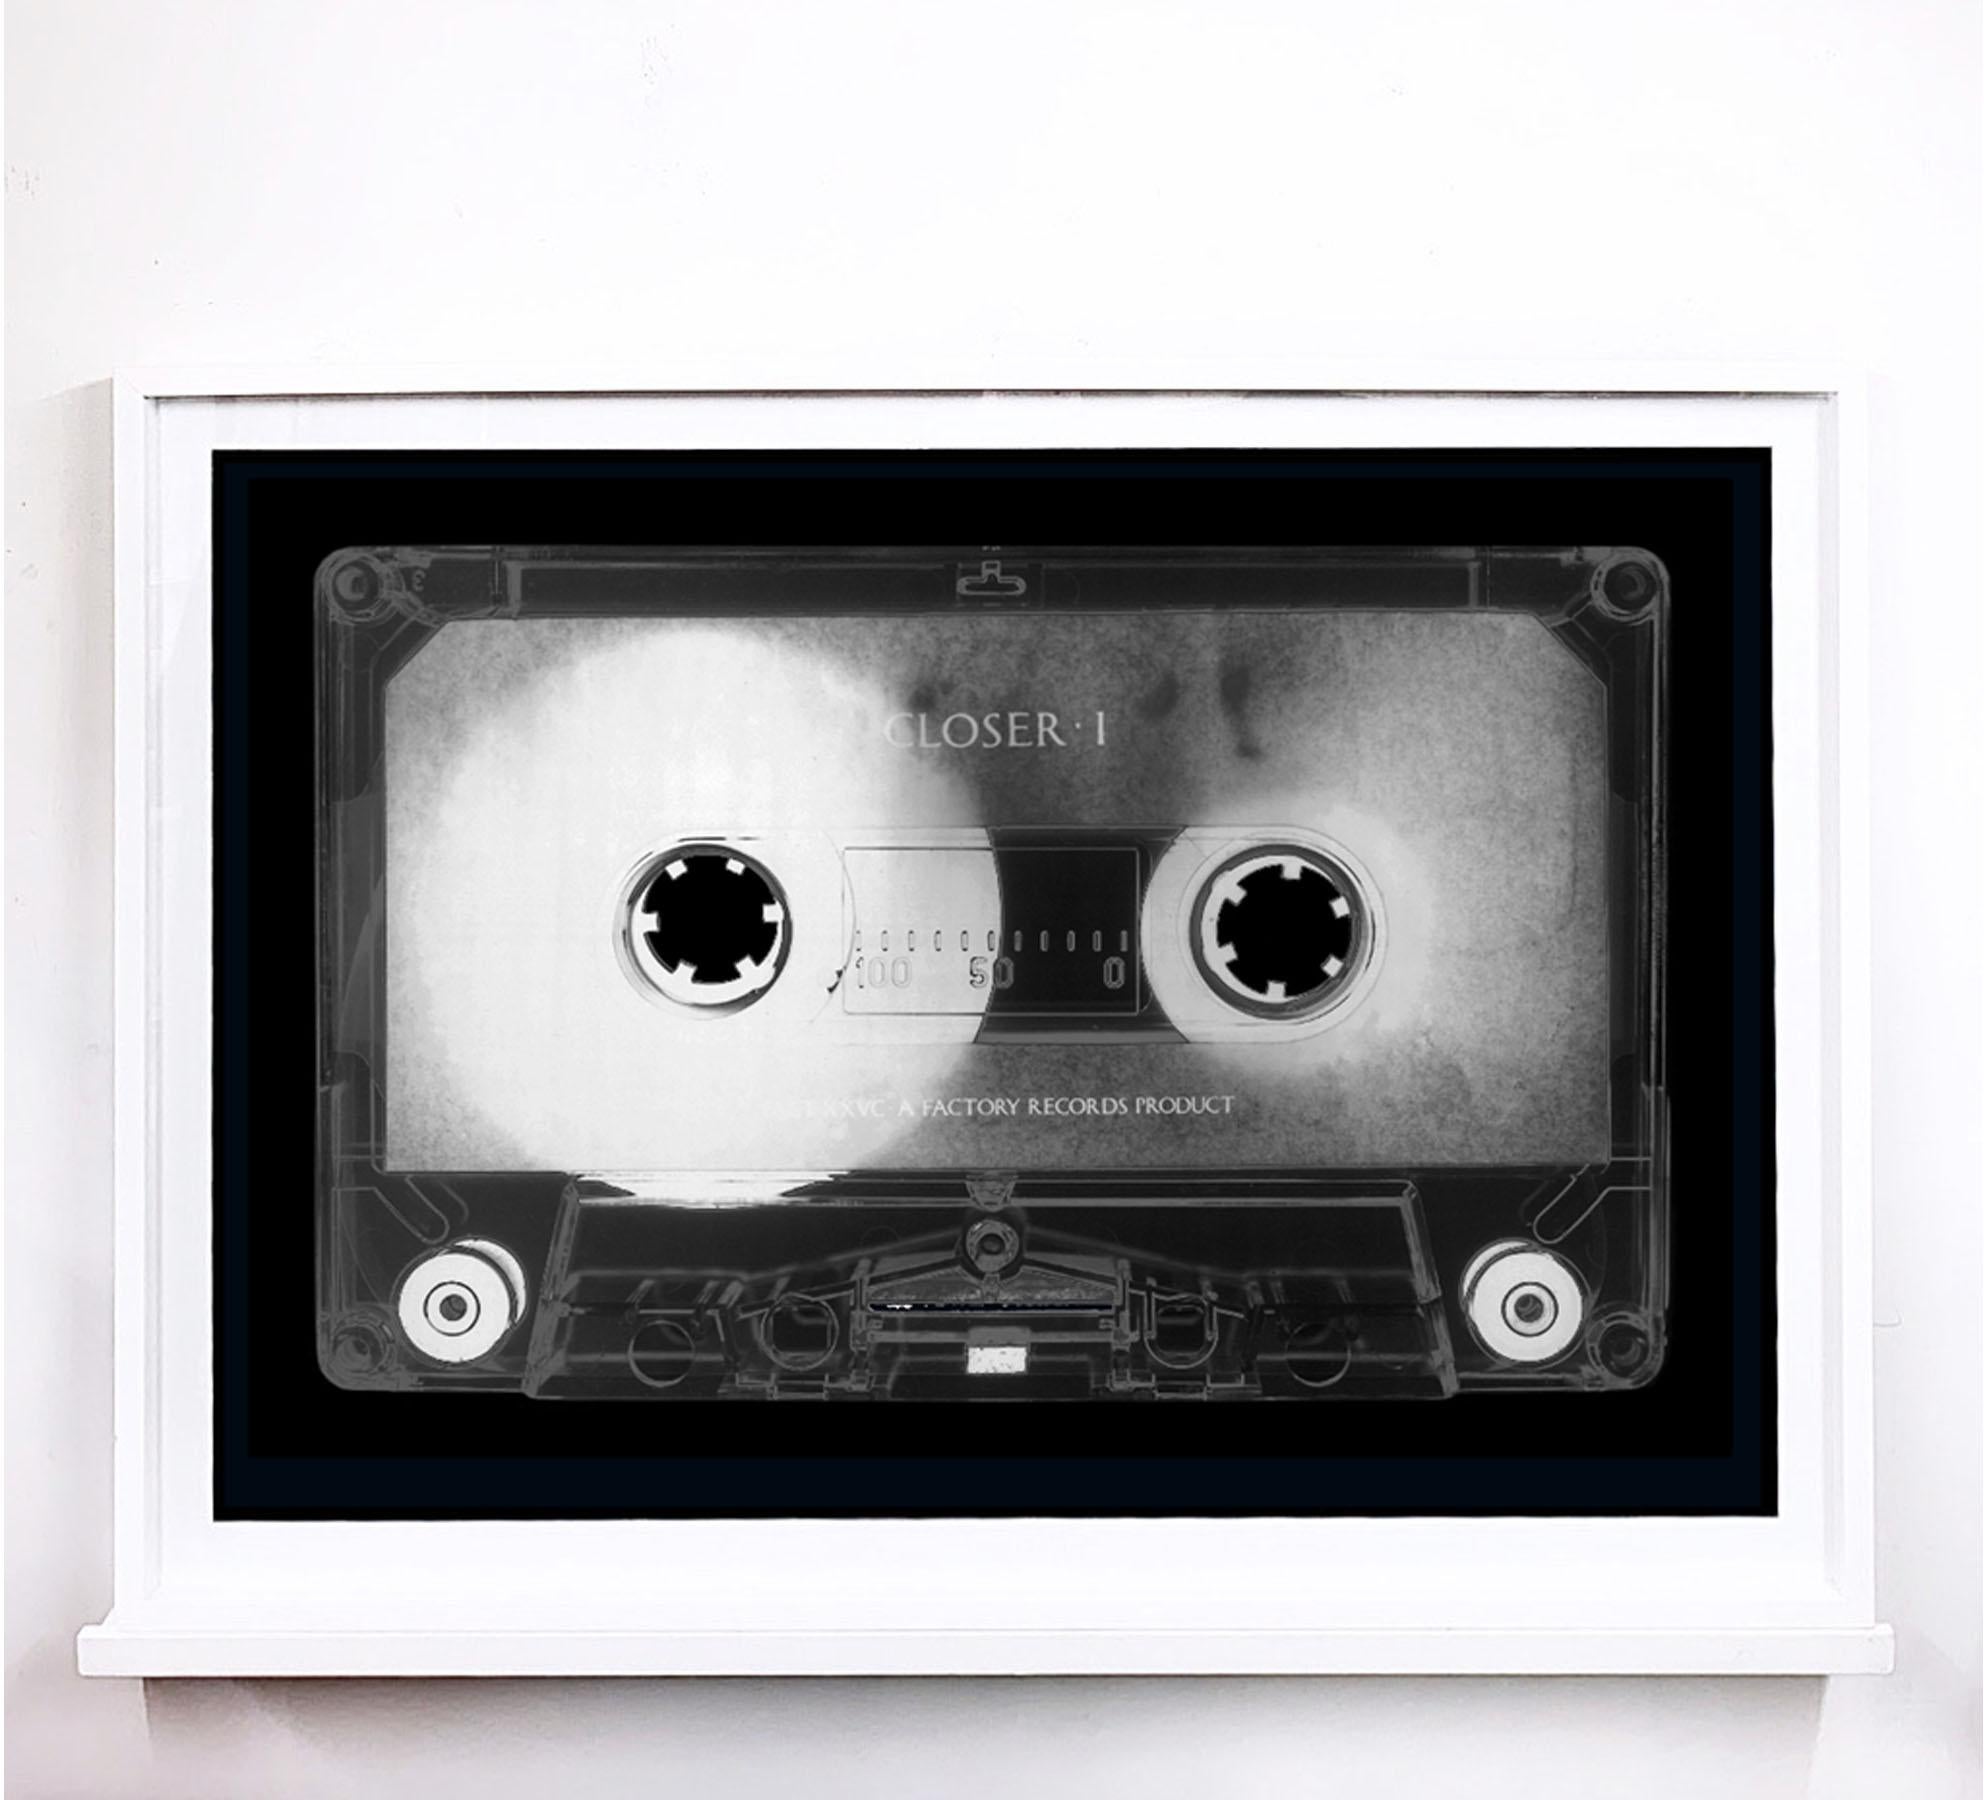 Tape Collection - Product of the 80's - Conceptual Color Music Art - Pop Art Photograph by Heidler & Heeps